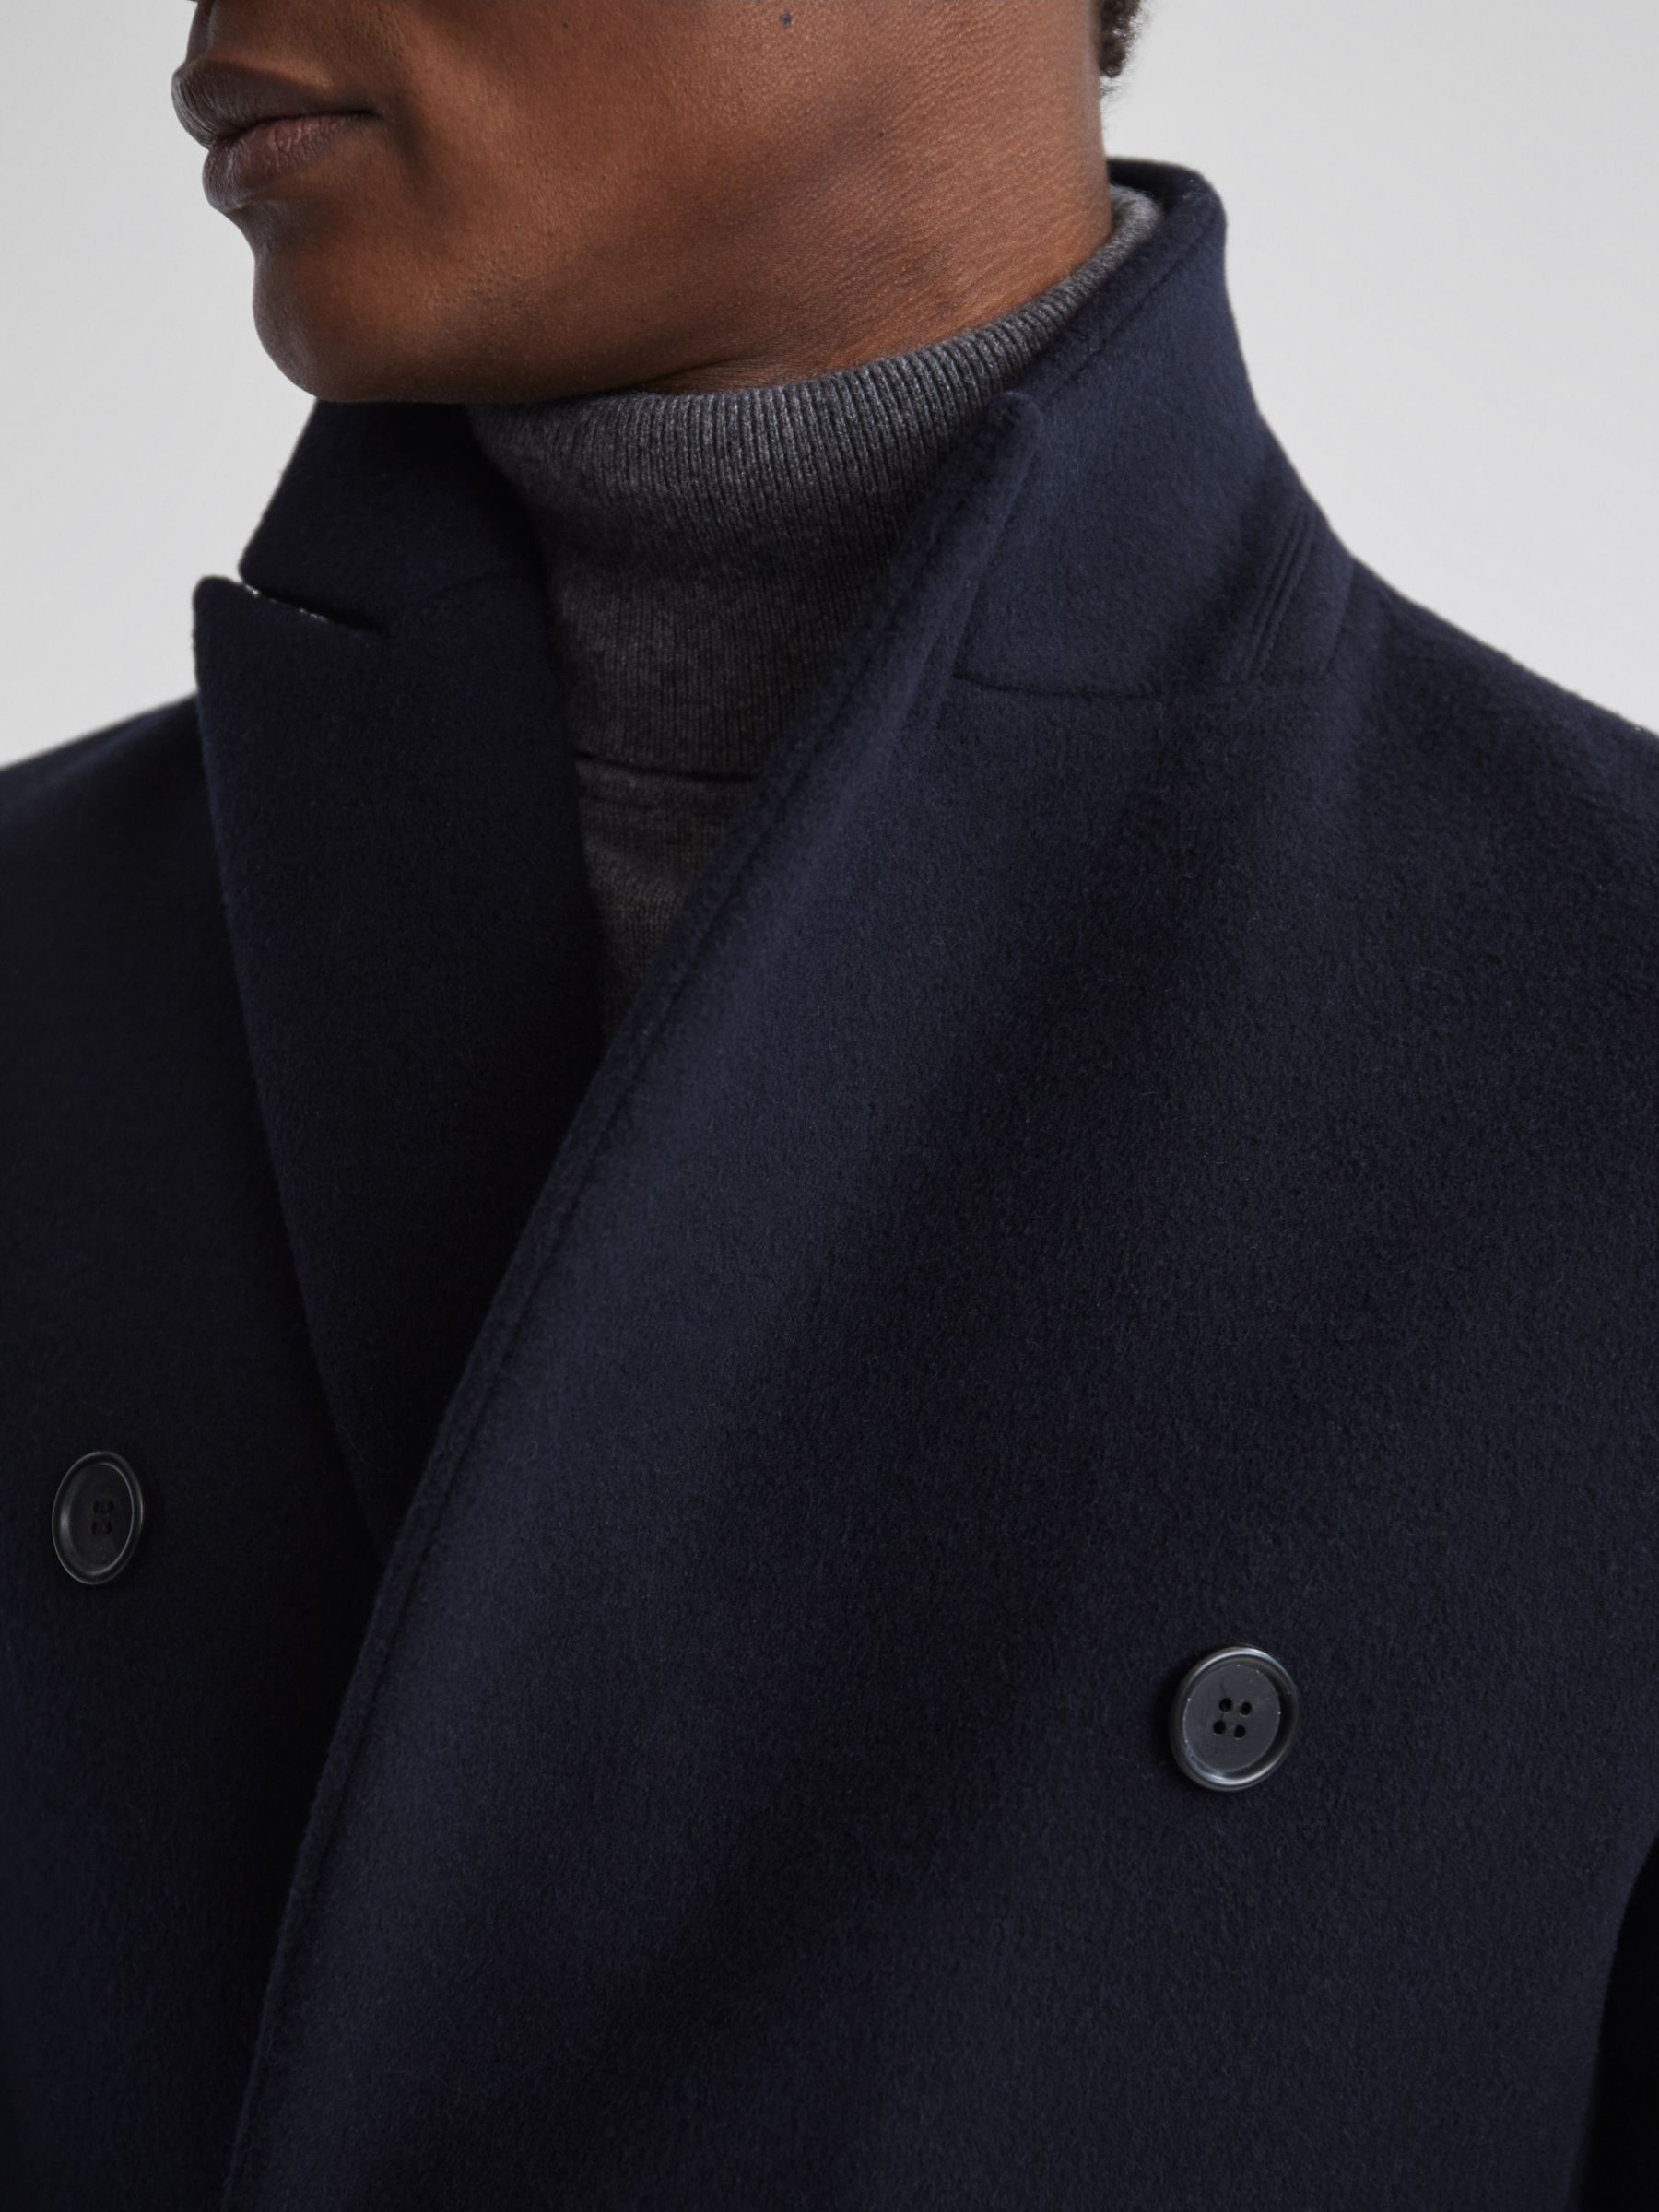 Reiss Glory Double Breasted Peacoat, Navy, XS